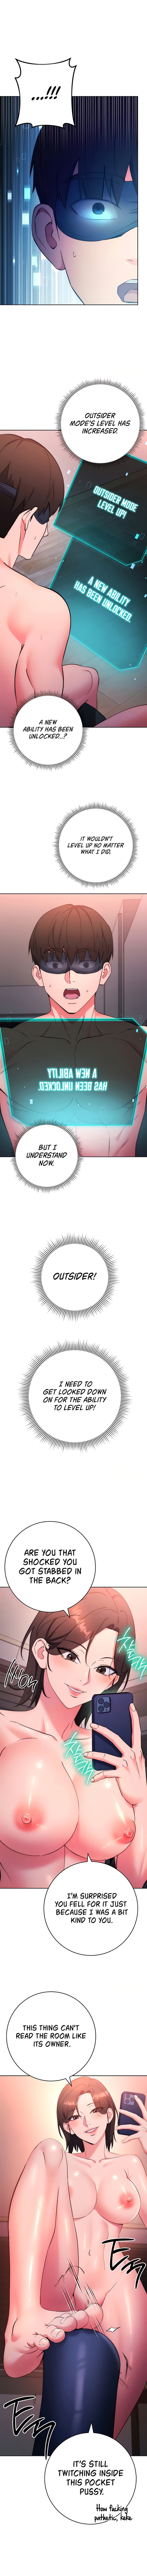 Outsider: The Invisible Man Chapter 9 - Page 2